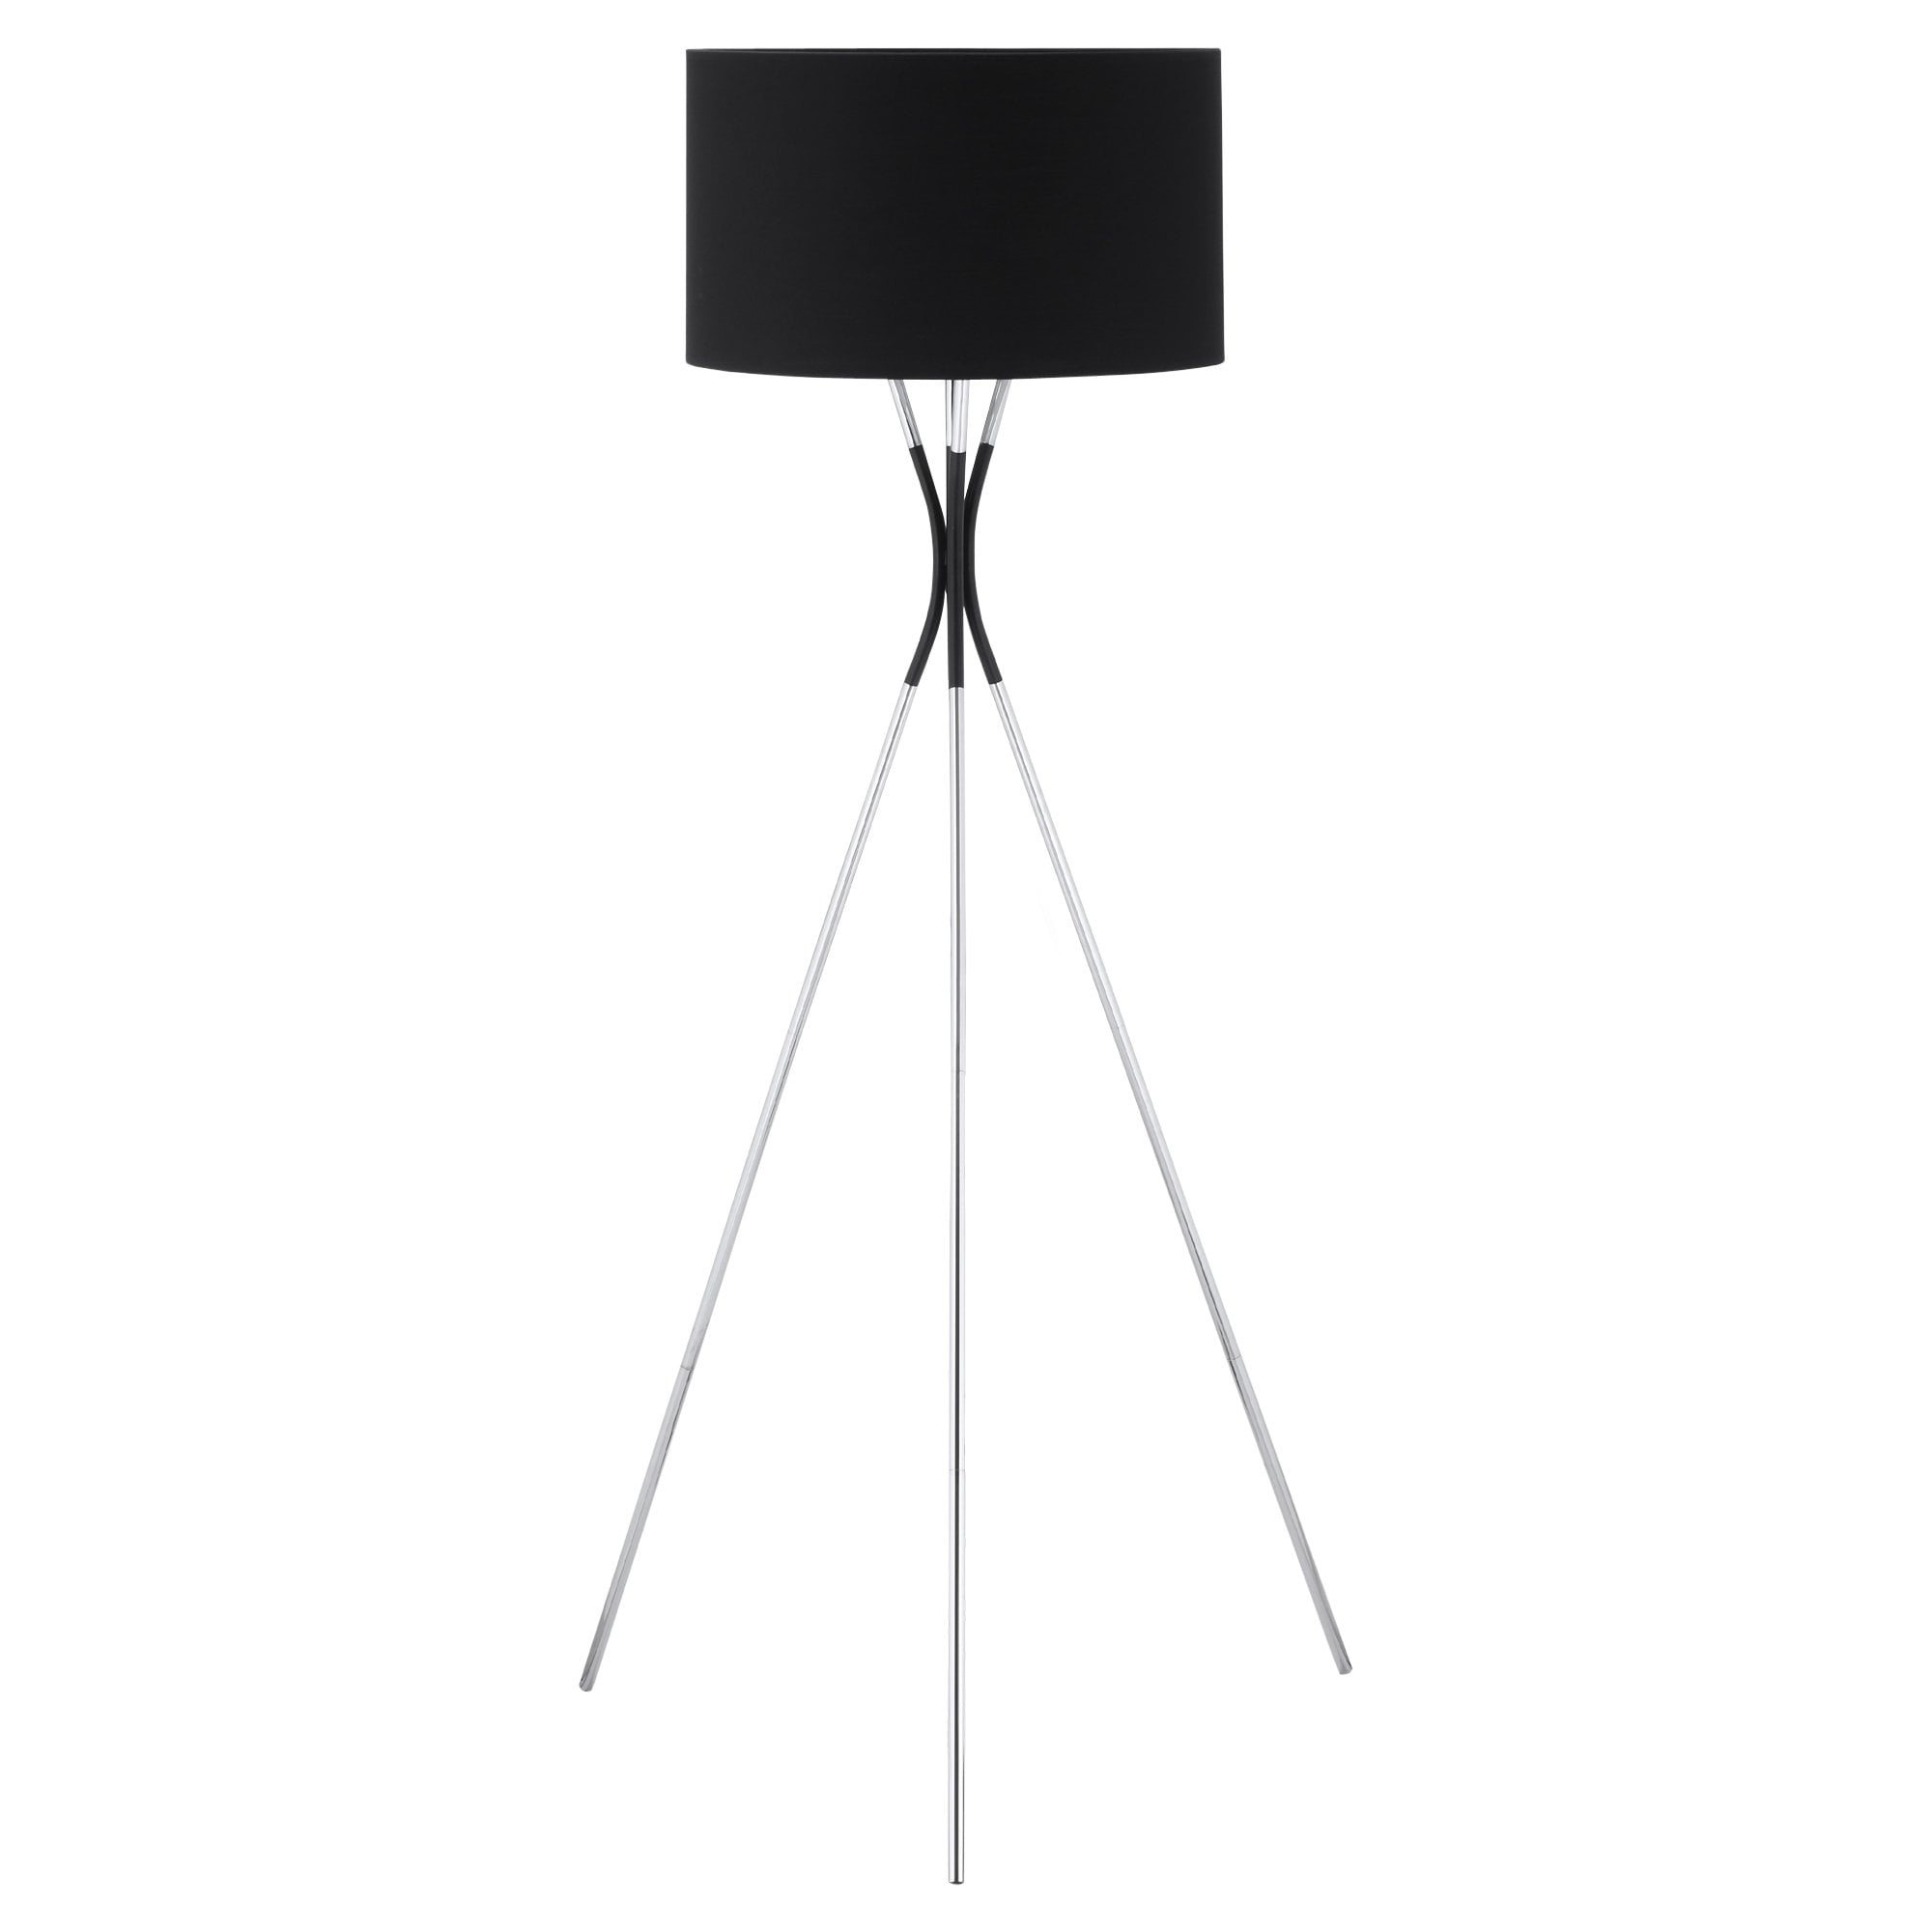 Modern Tripod Floor Lamp - Free Standing Light with Metal Frame - Fabric Lampshade and E27 Base for Living Room - Bedroom - Office - Black Bedroom - H